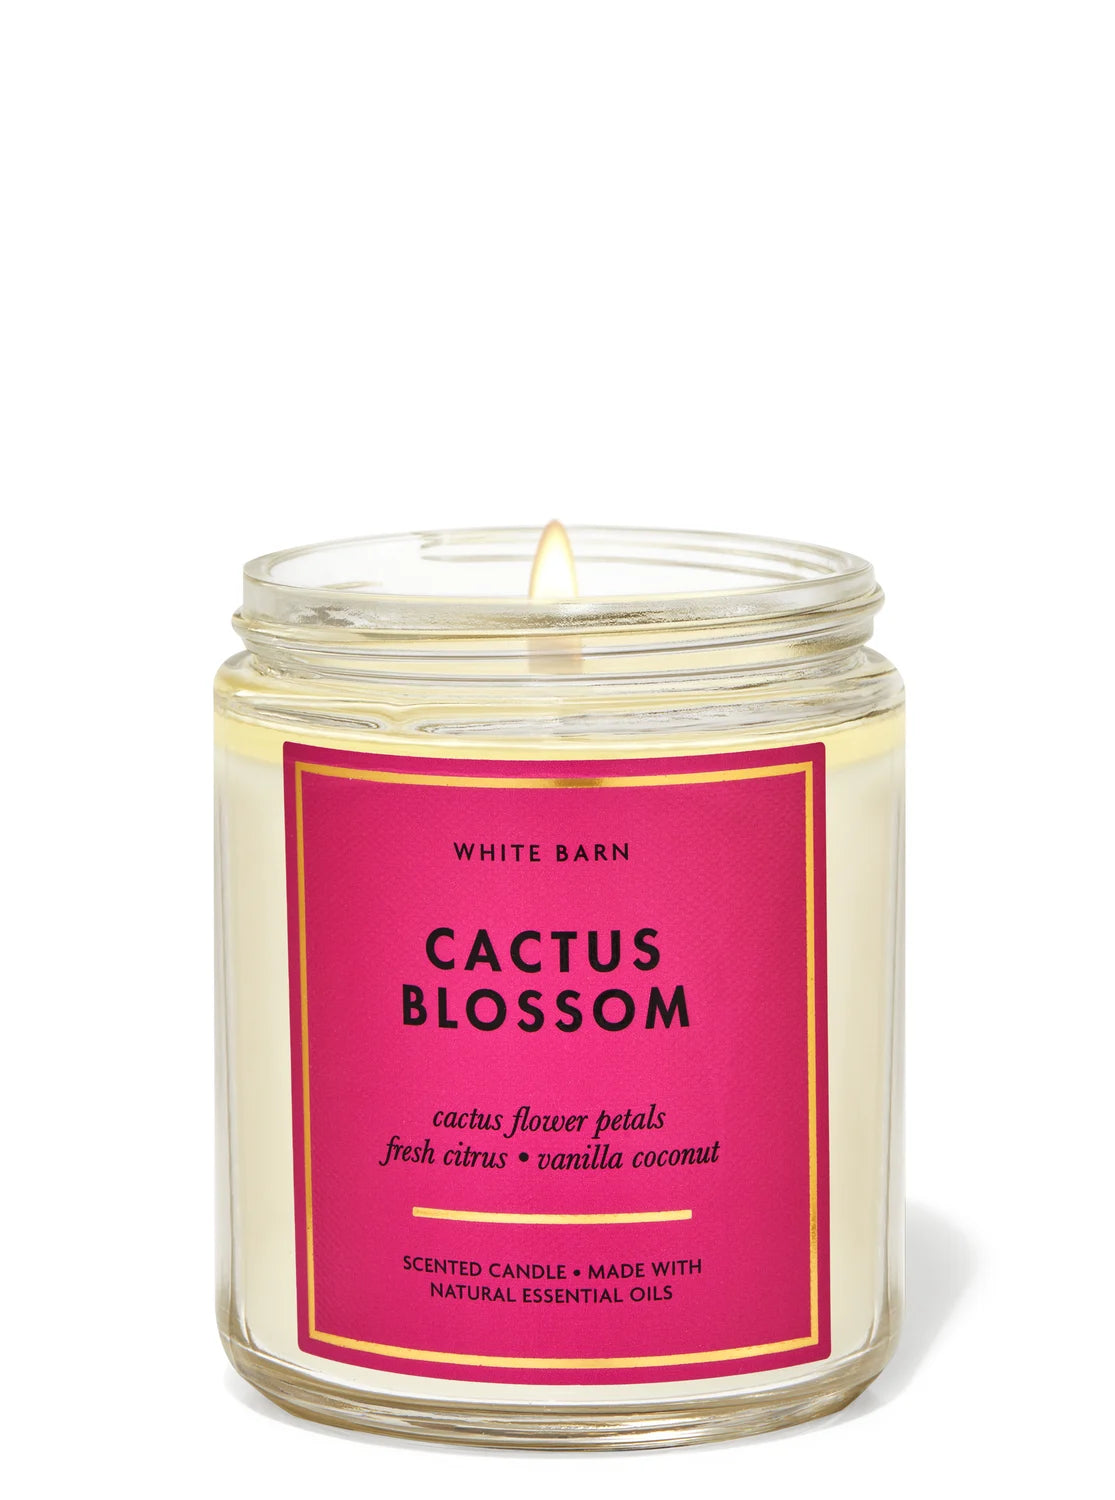 Bath & Body Works Cactus Blossom Single Wick Candle